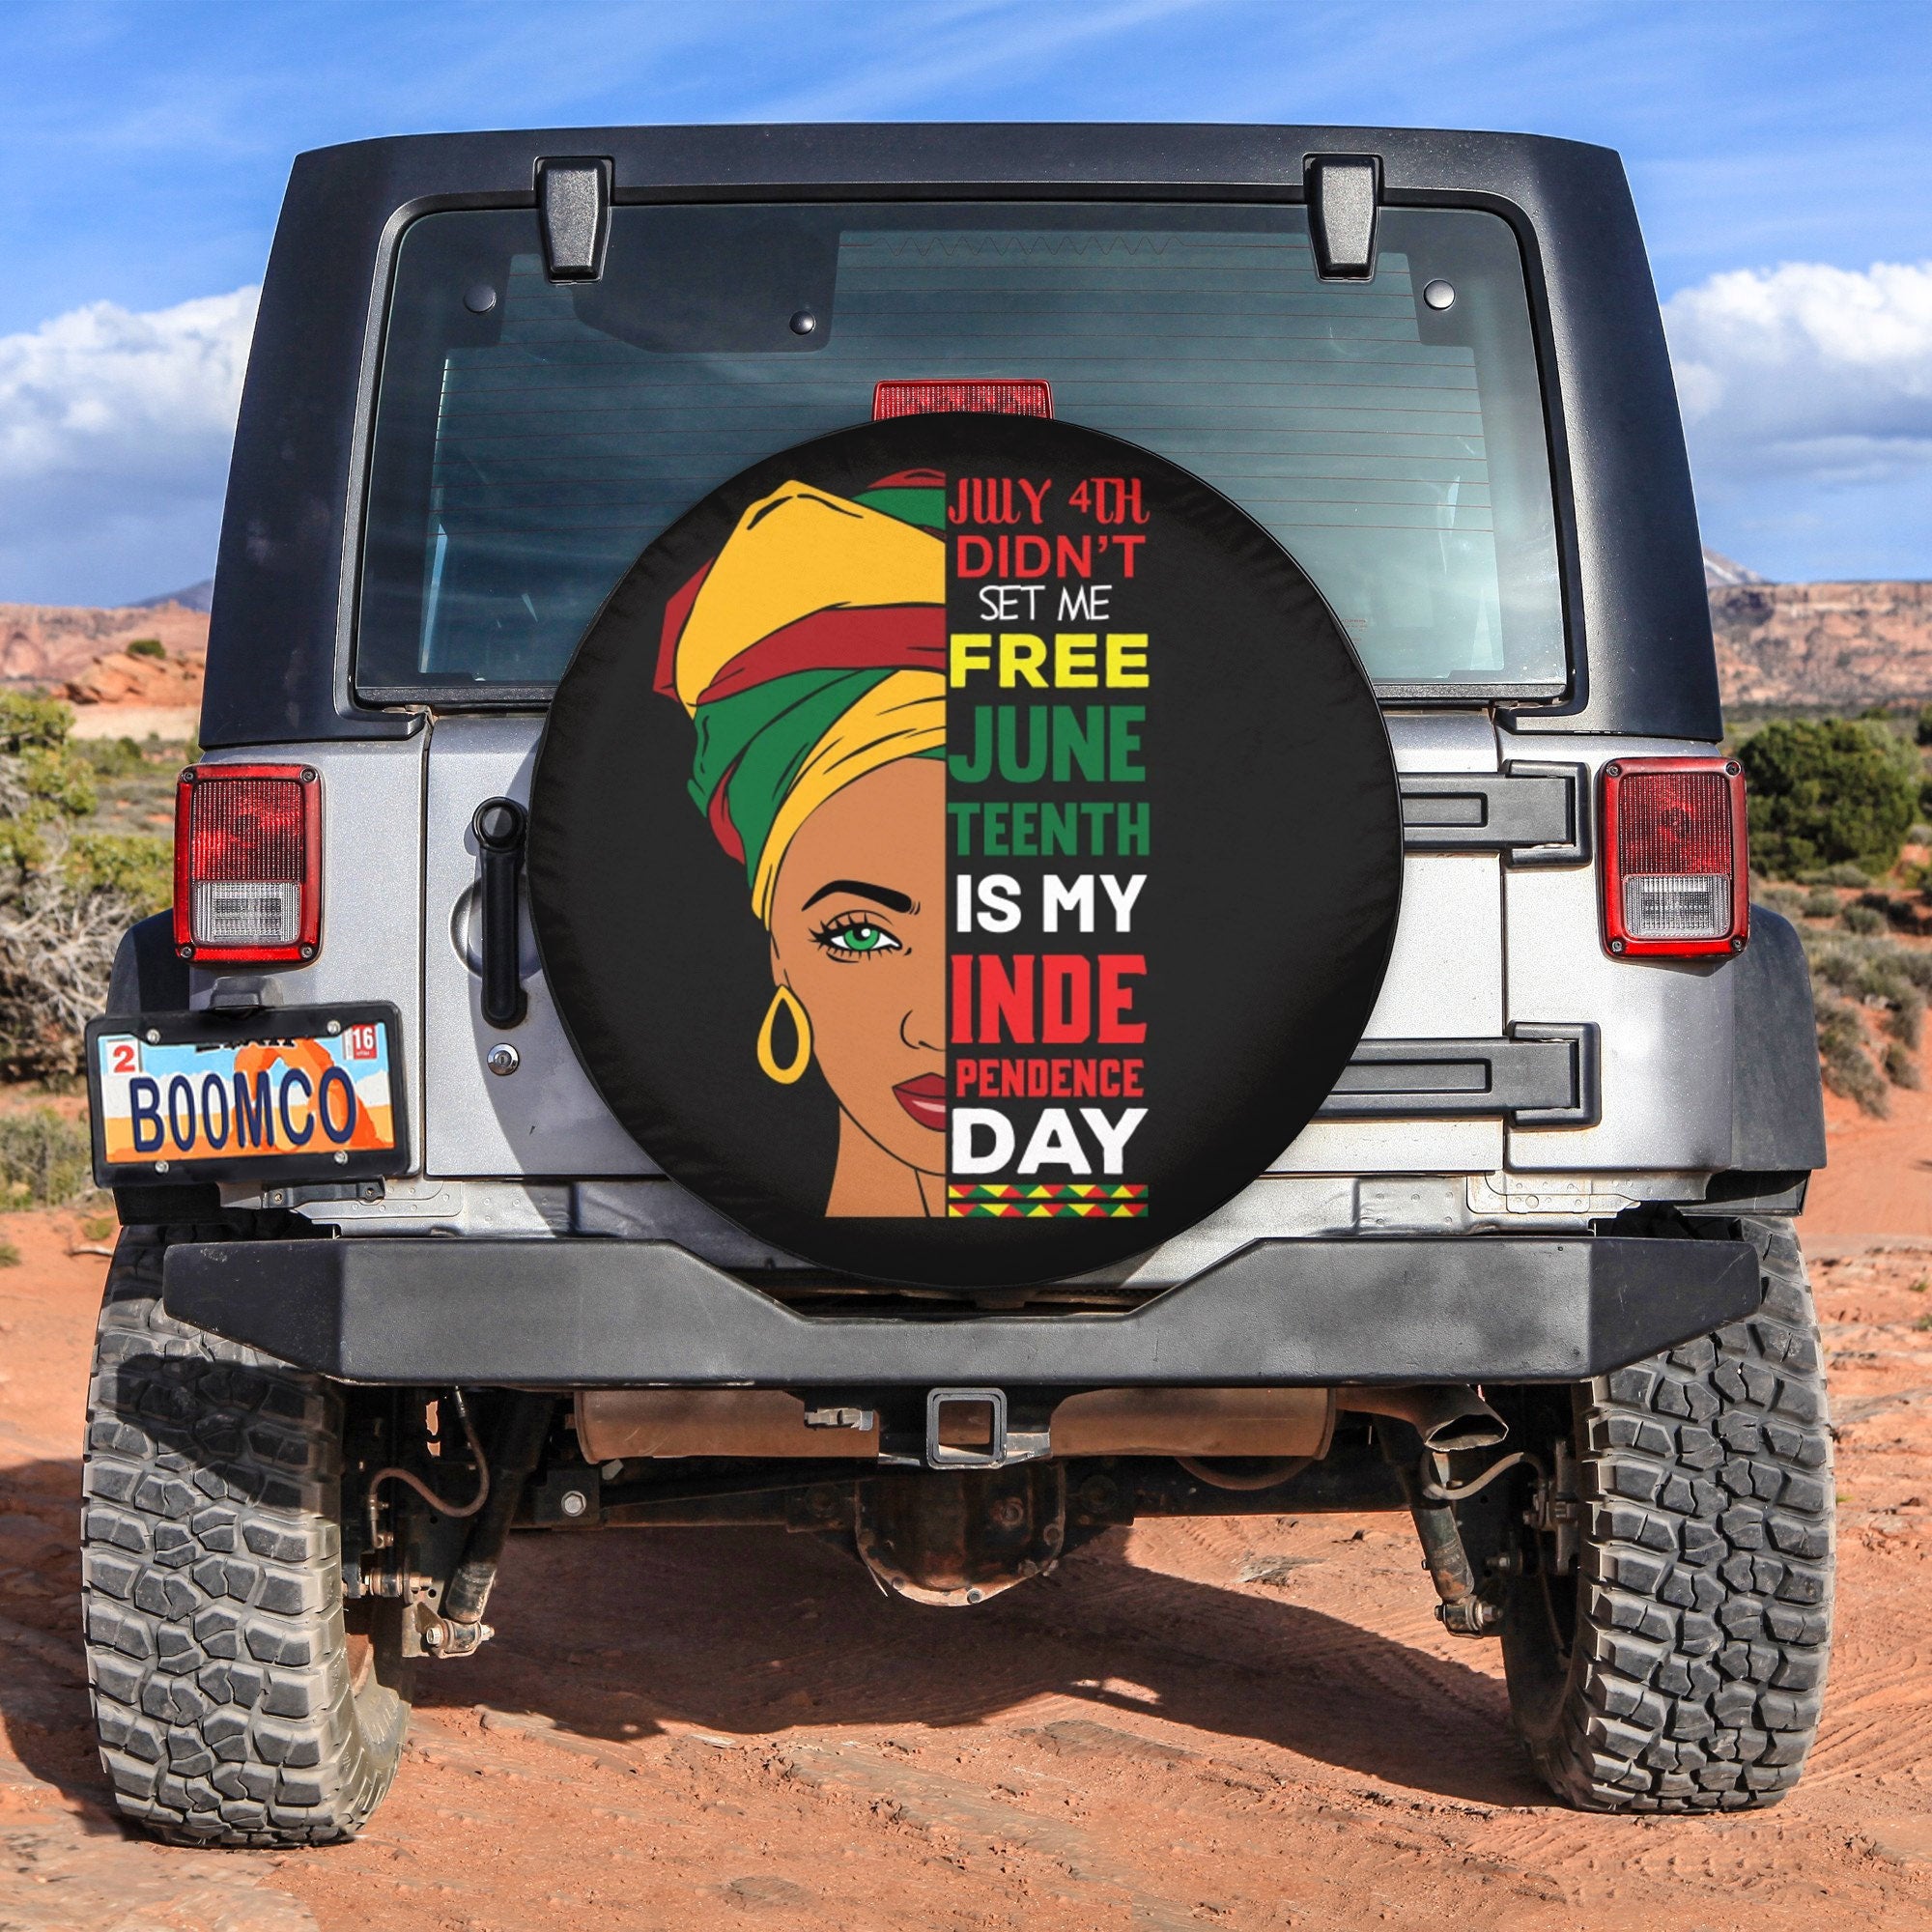 African Tire Covers - Juneteenth Spare Tire Cover July 4th Didn't Set Me Free Juneteenth Is My Independence Day NO.191 LT8